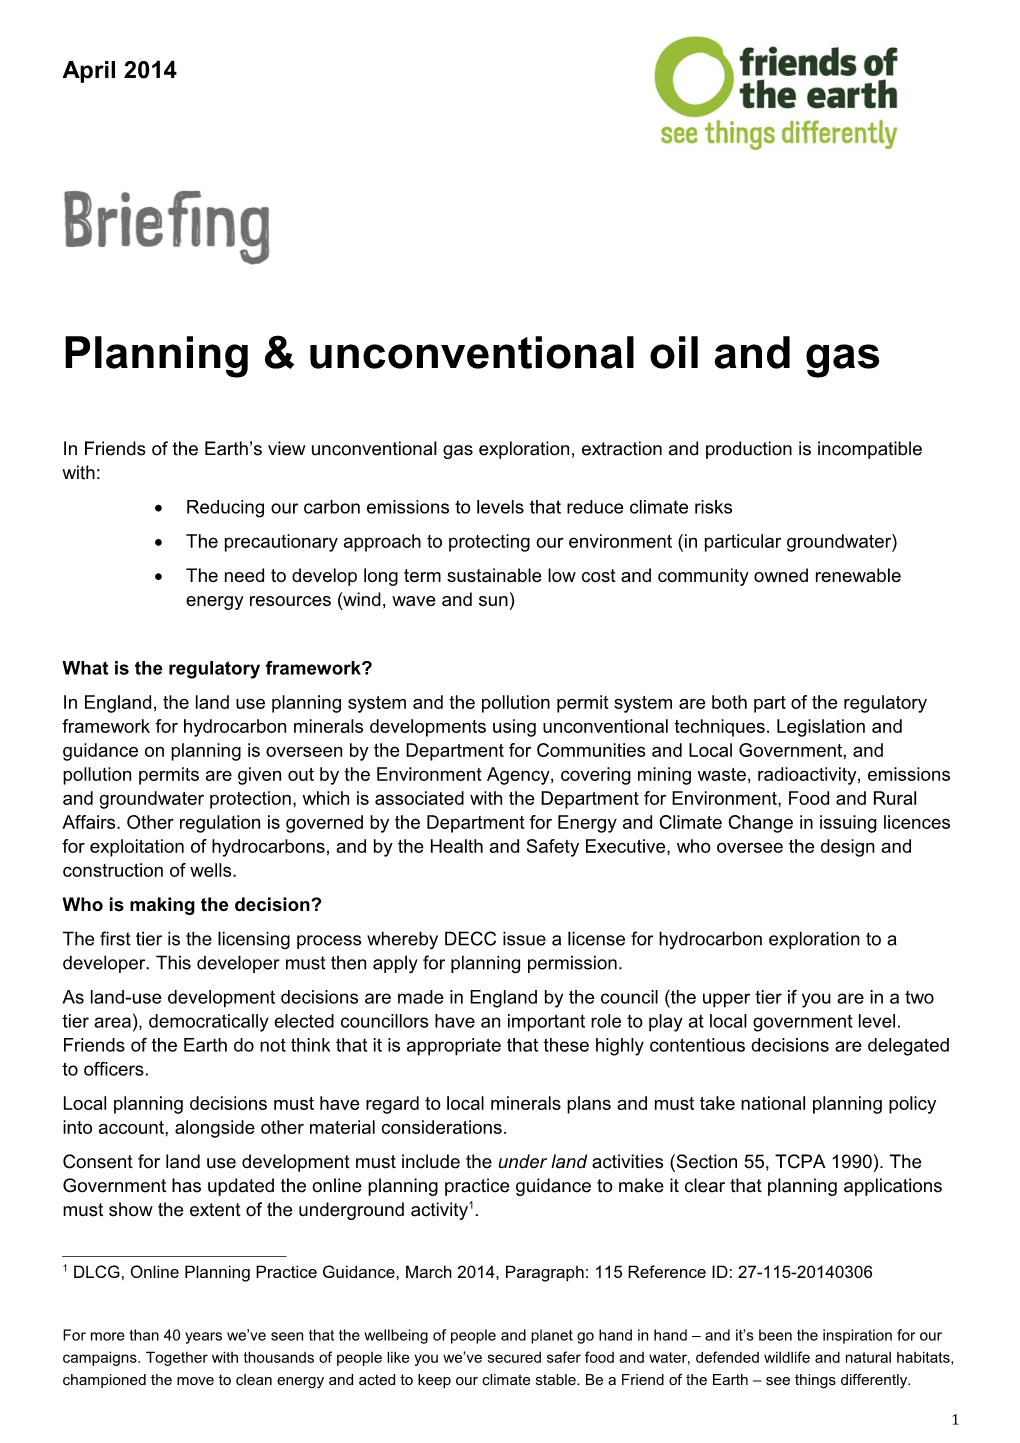 Unconventional Oil and Gas and Planning